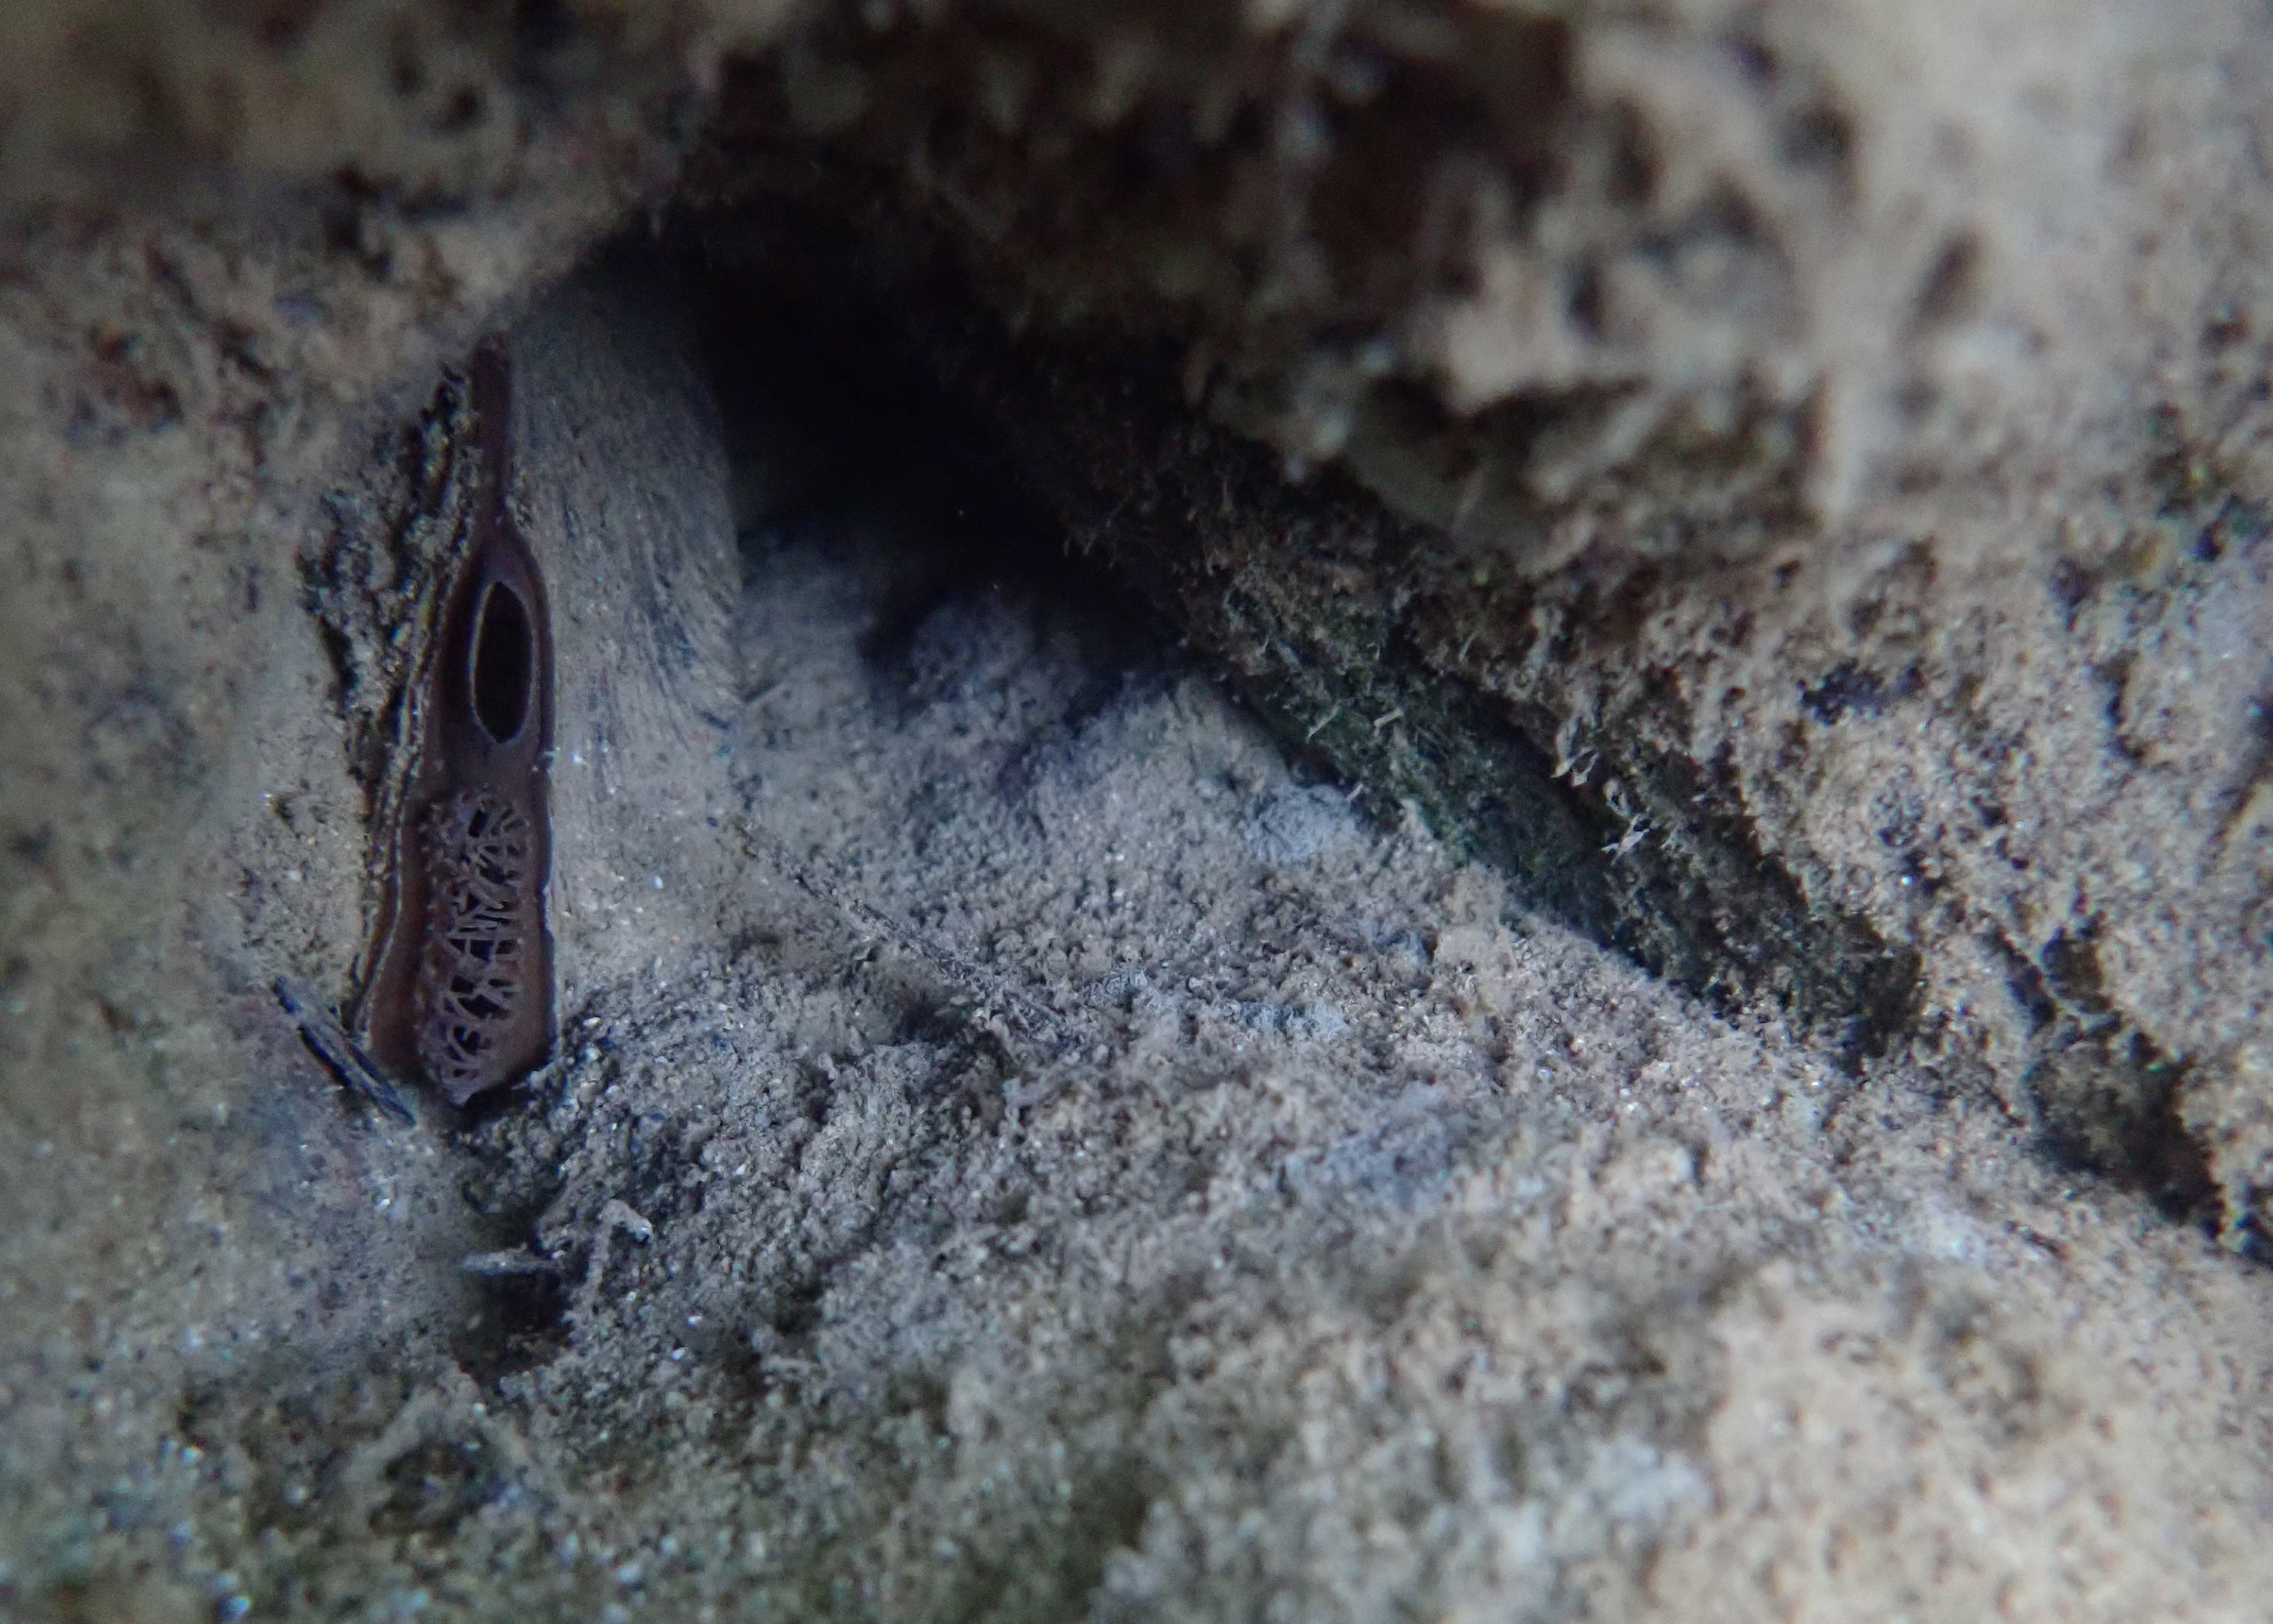 A freshwater mussel tucked between rocks. The mussel is slightly open, showing the mass of fingerlike projections that cover the hole where it sucks in river water.